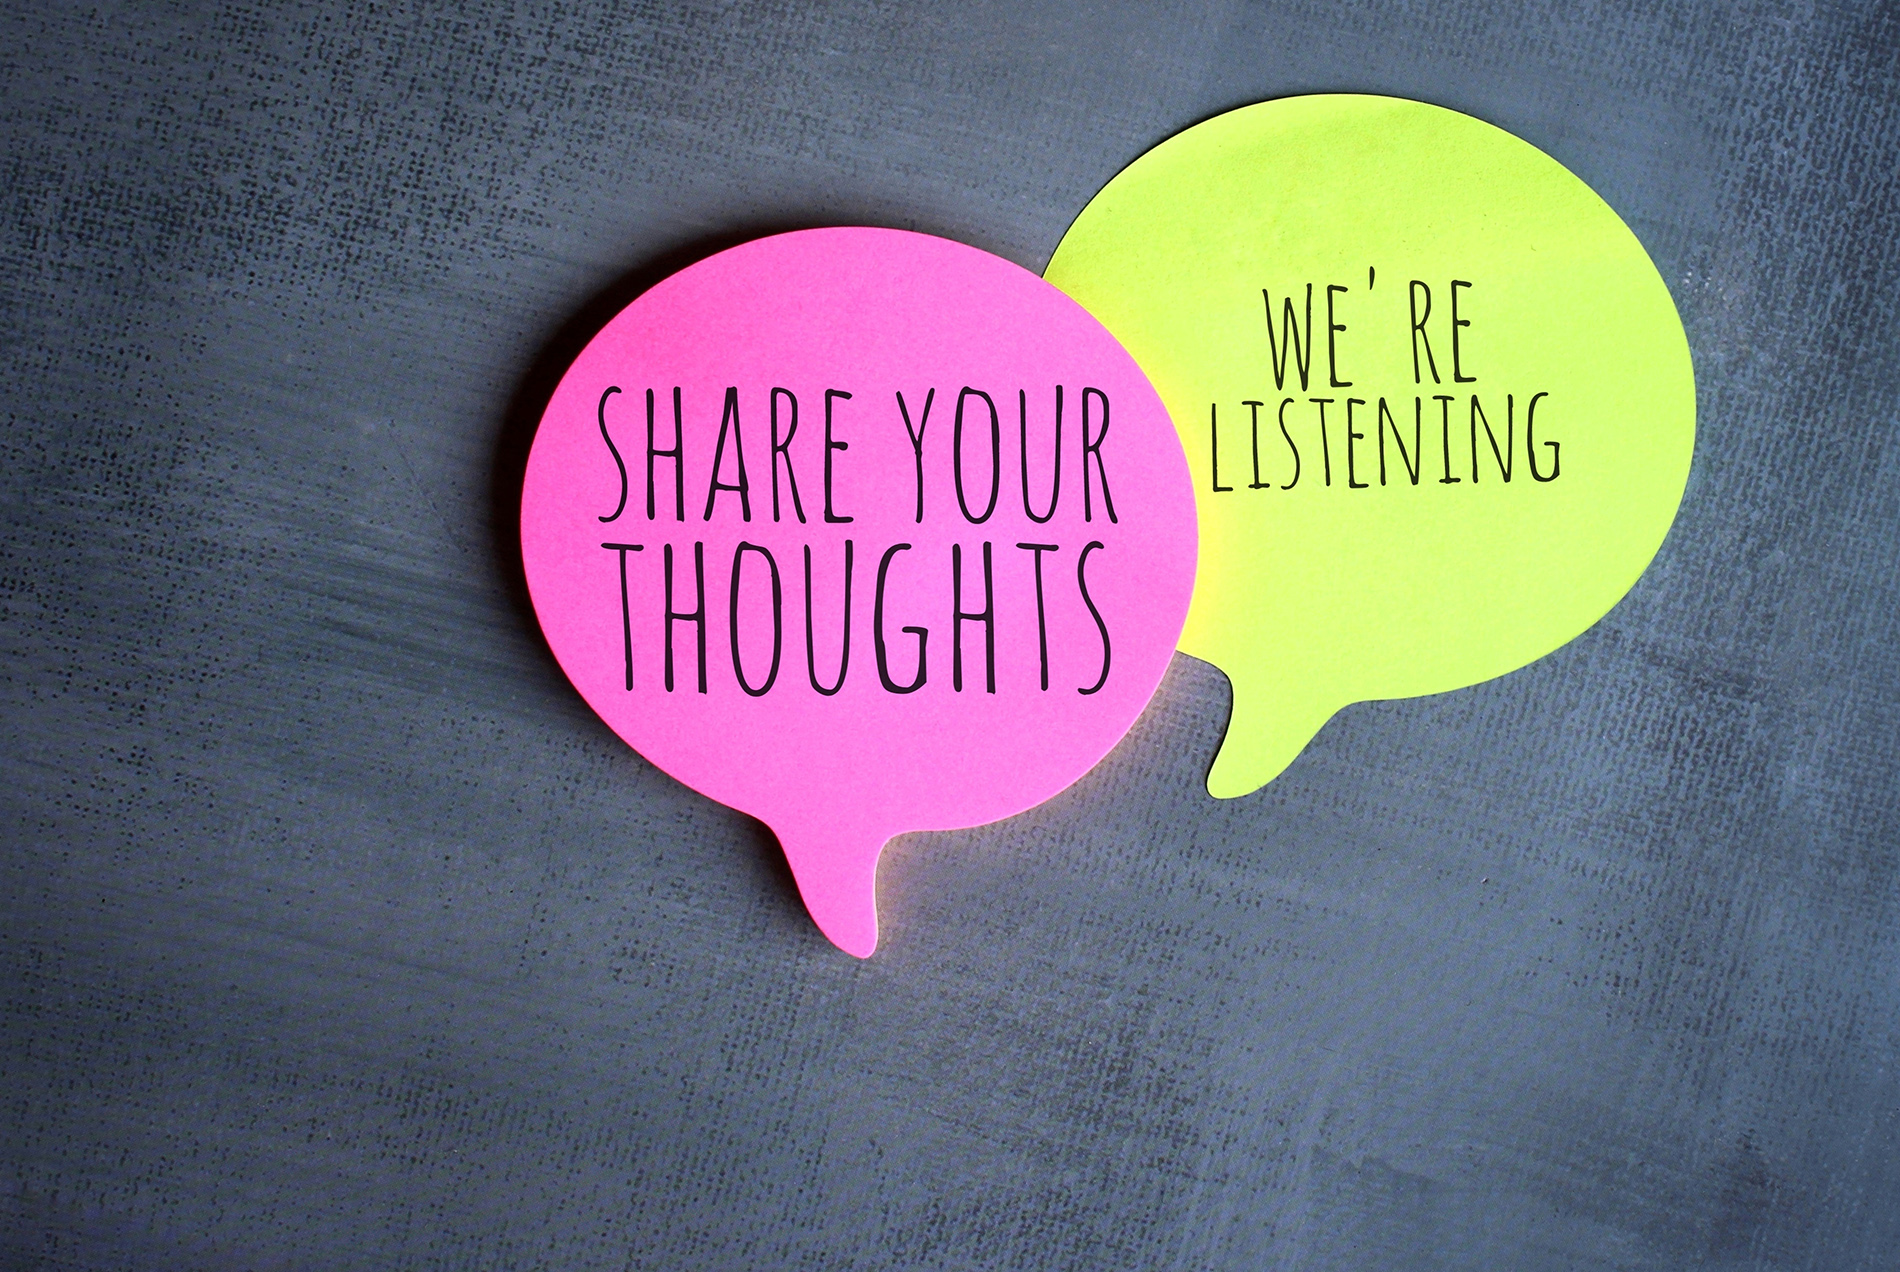 Sticky notes that say "share your thoughts" and "we're listening"